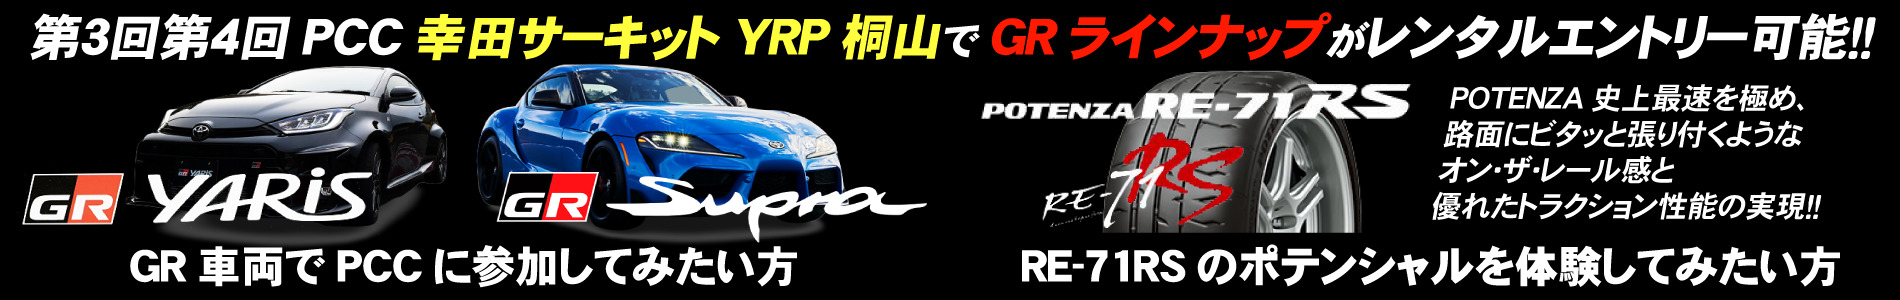 POTENZA RE-71RS